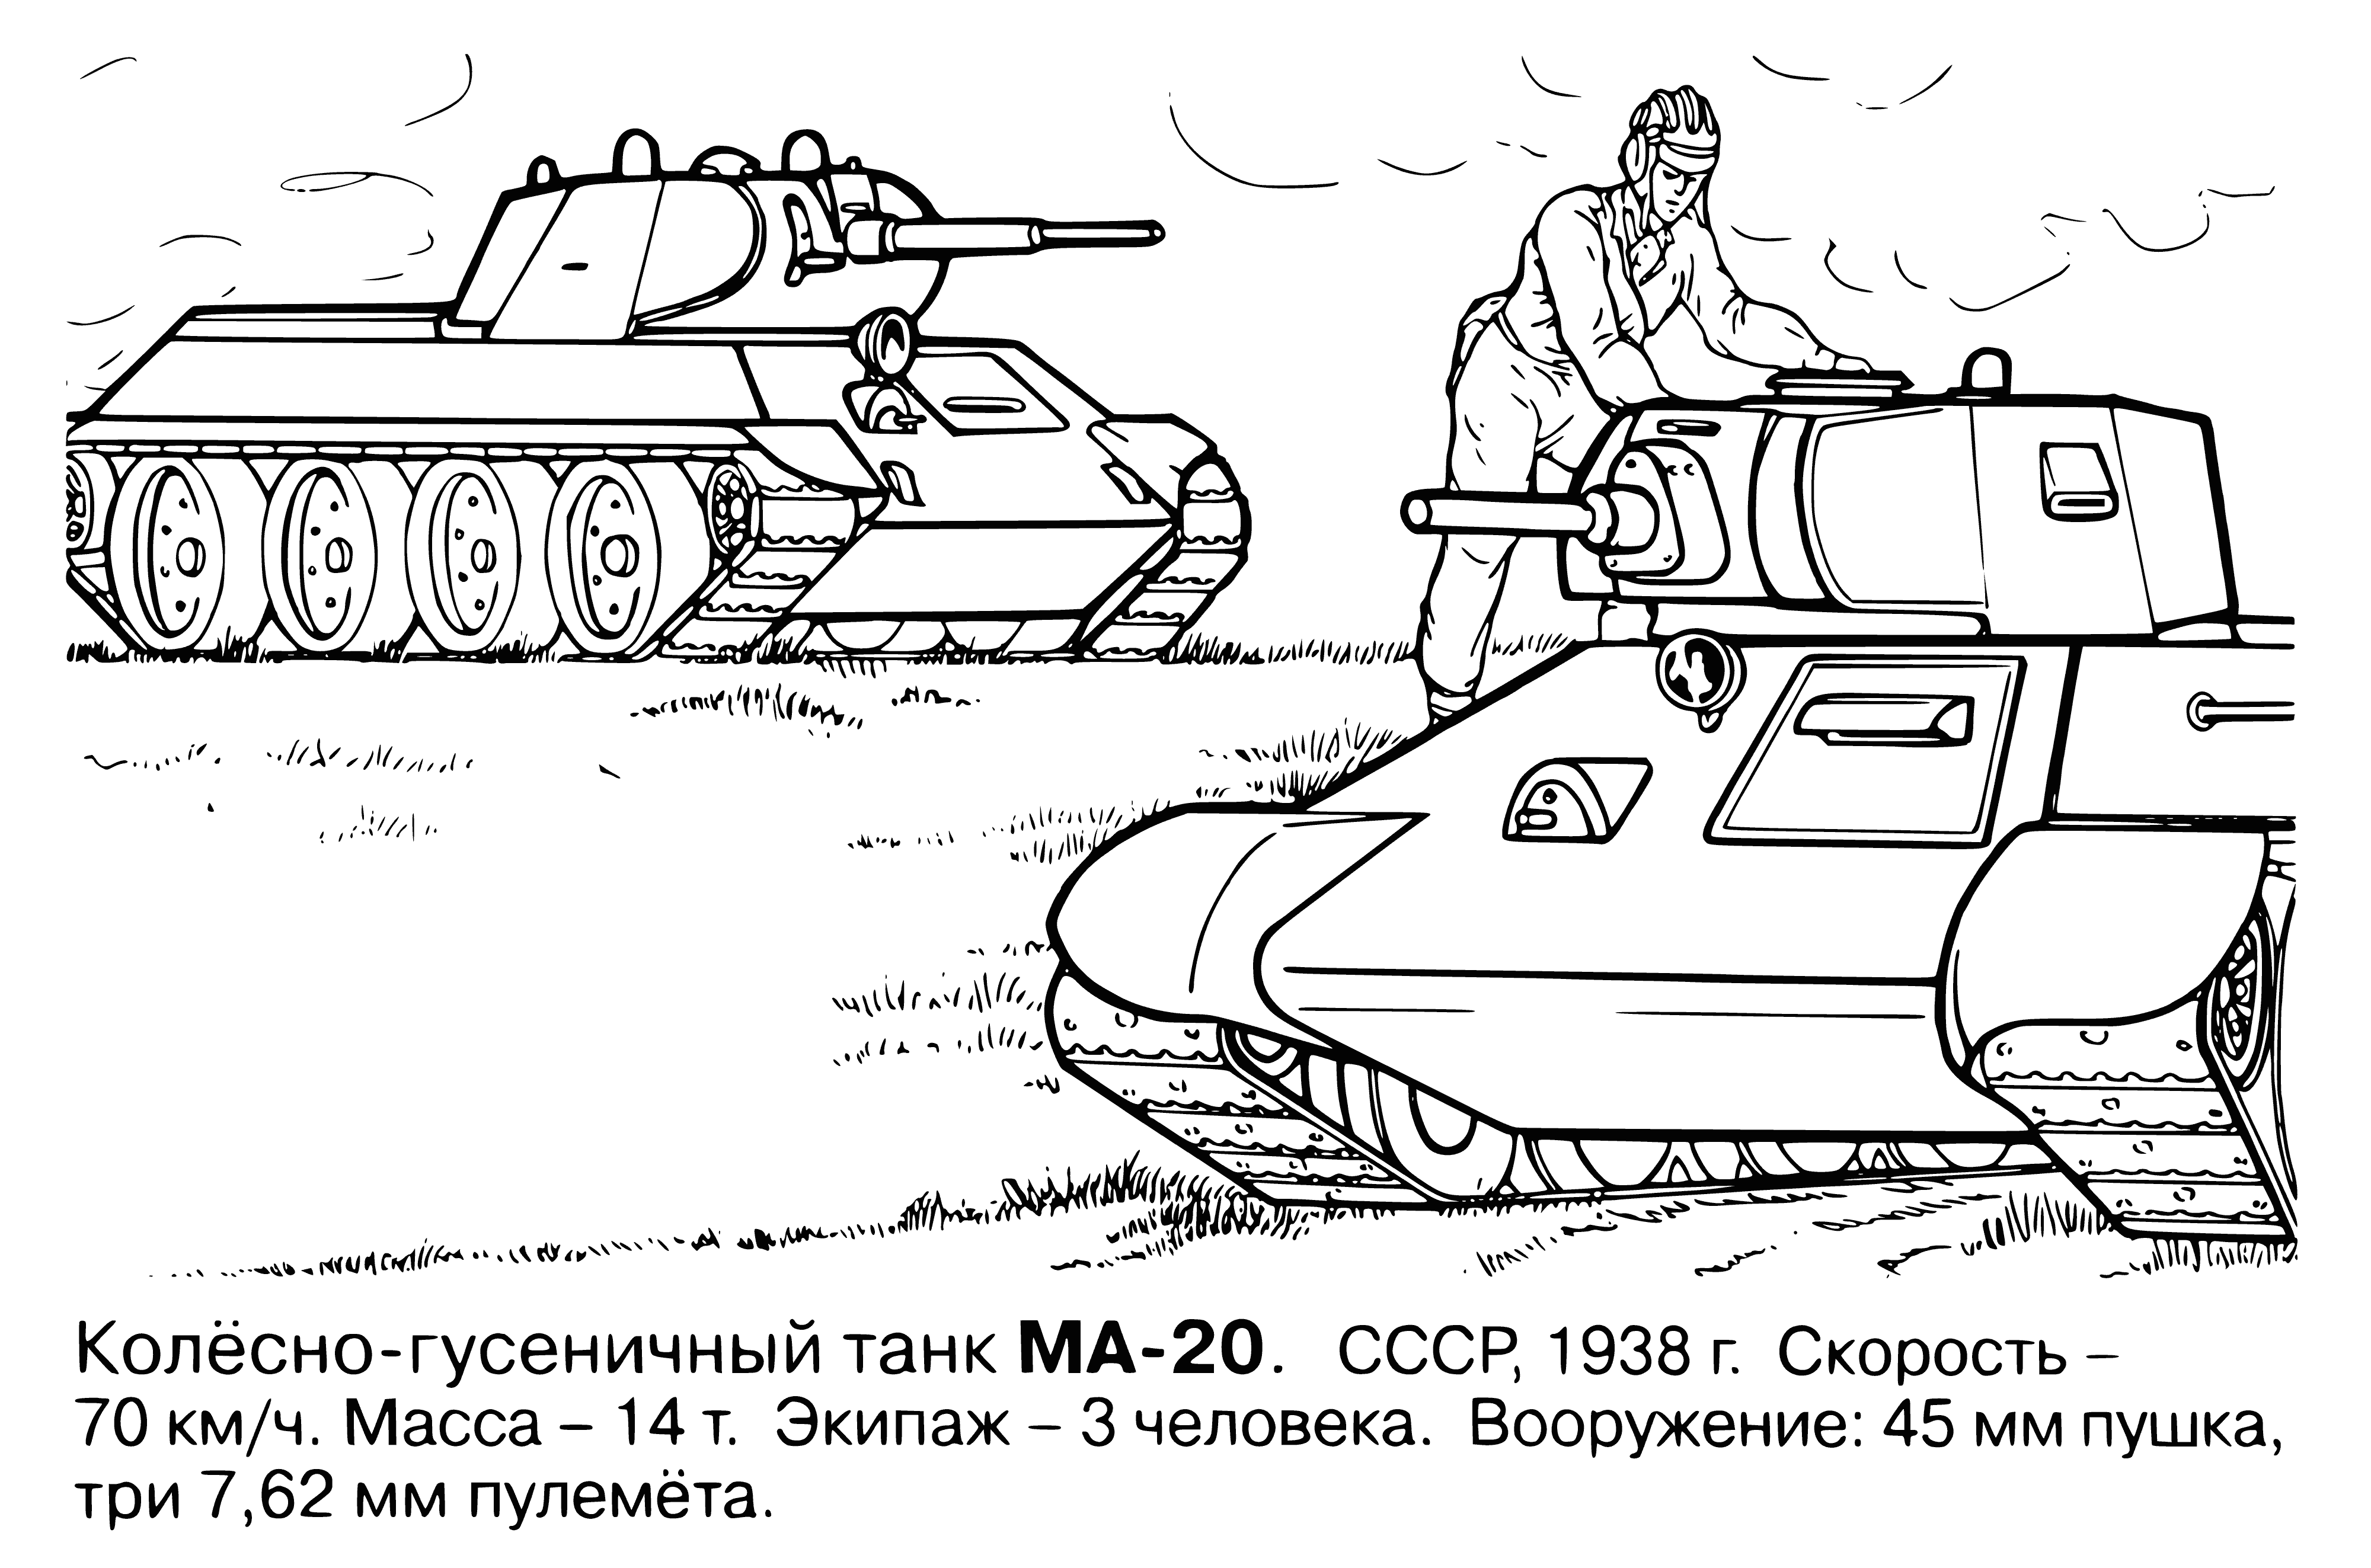 coloring page: Large tank w/track wheels, 2 large guns + small gun on top in grassy field. #coloringpage